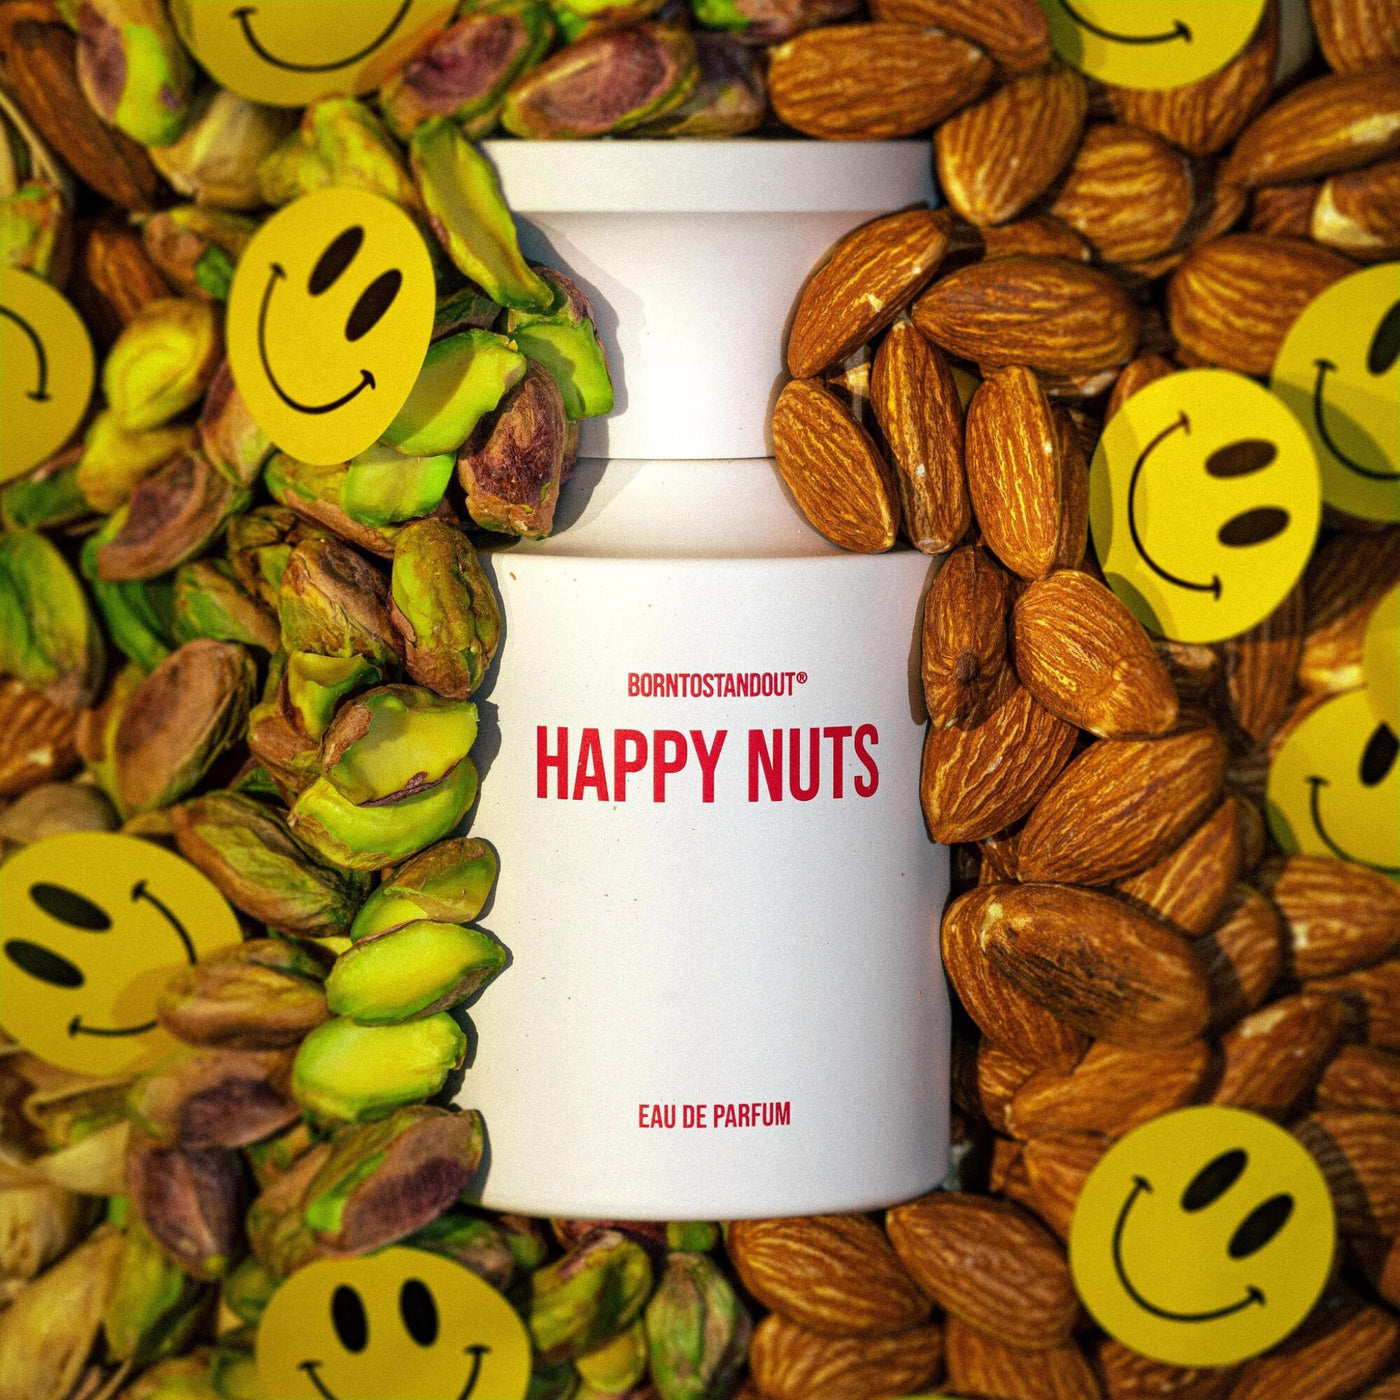 Happy Nuts Perfume Born to stand out